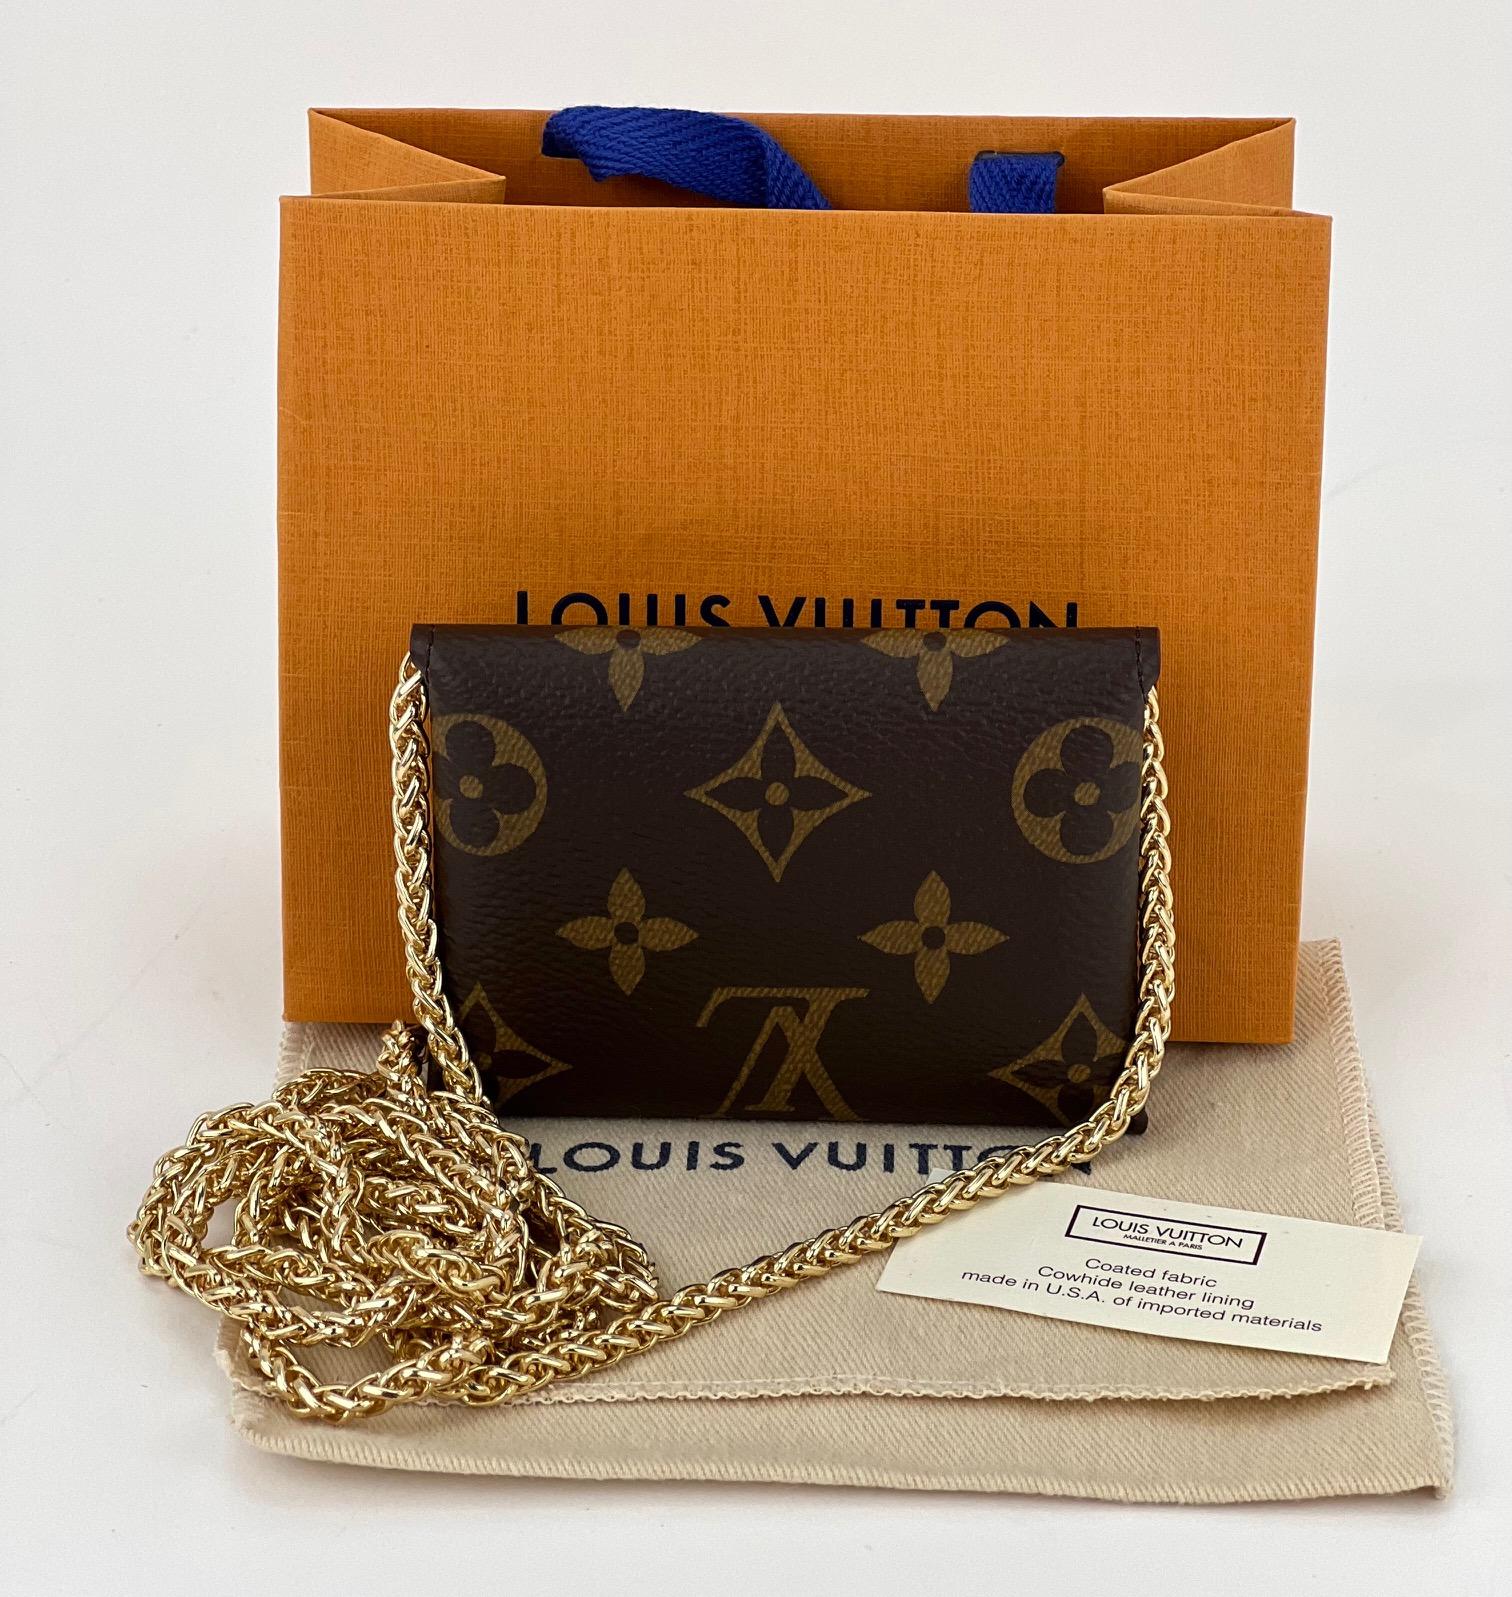 Preowned BUT like New 100% Authentic
LOUIS VUITTON Kirigami Pochette Burgundy Small
W/Added Non LV Insert & Chain to make a Crossbody
or Necklace
PLEASE NOTE SIZE: is small
RATING: A+...Excellent, near mint
MATERIAL: Monogram canvas
STRAP: Non LV